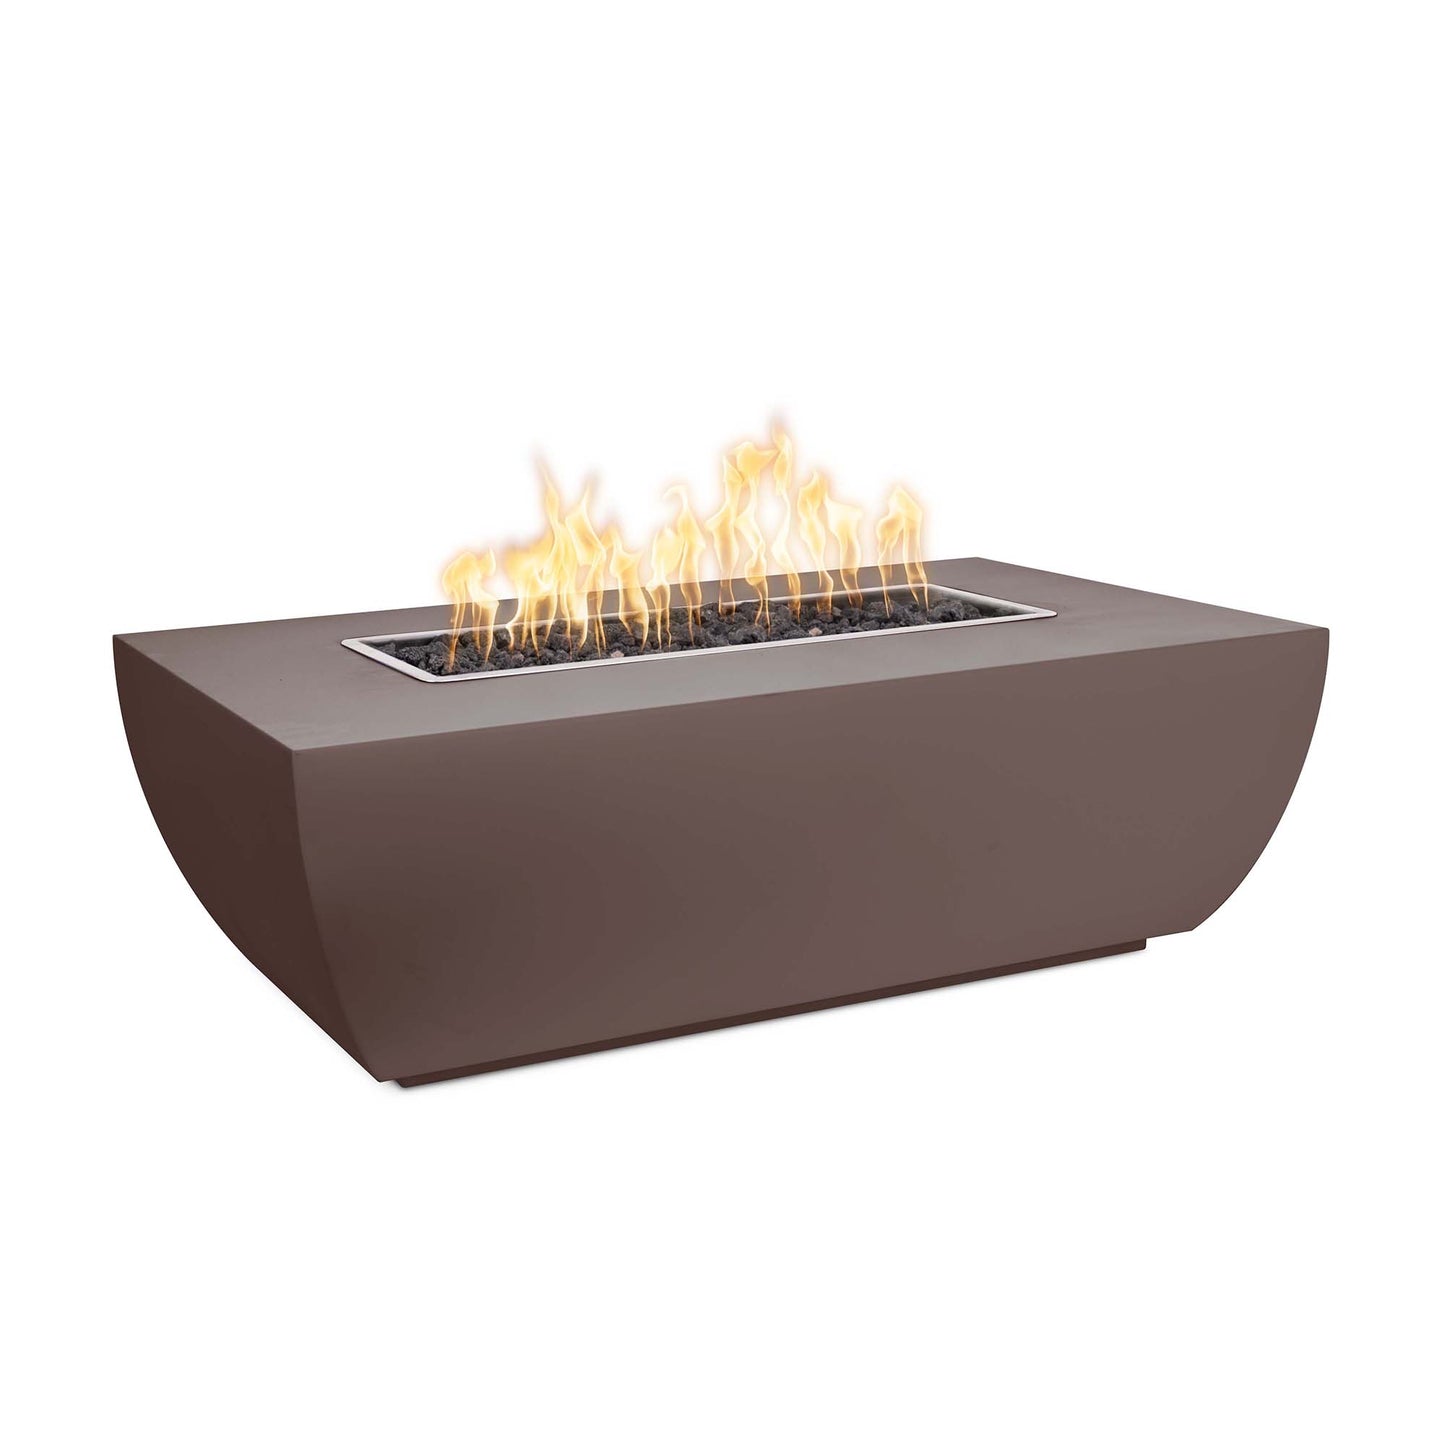 Avalon Metal Fire Pits 60" - 15" Tall - Electronic Ignition